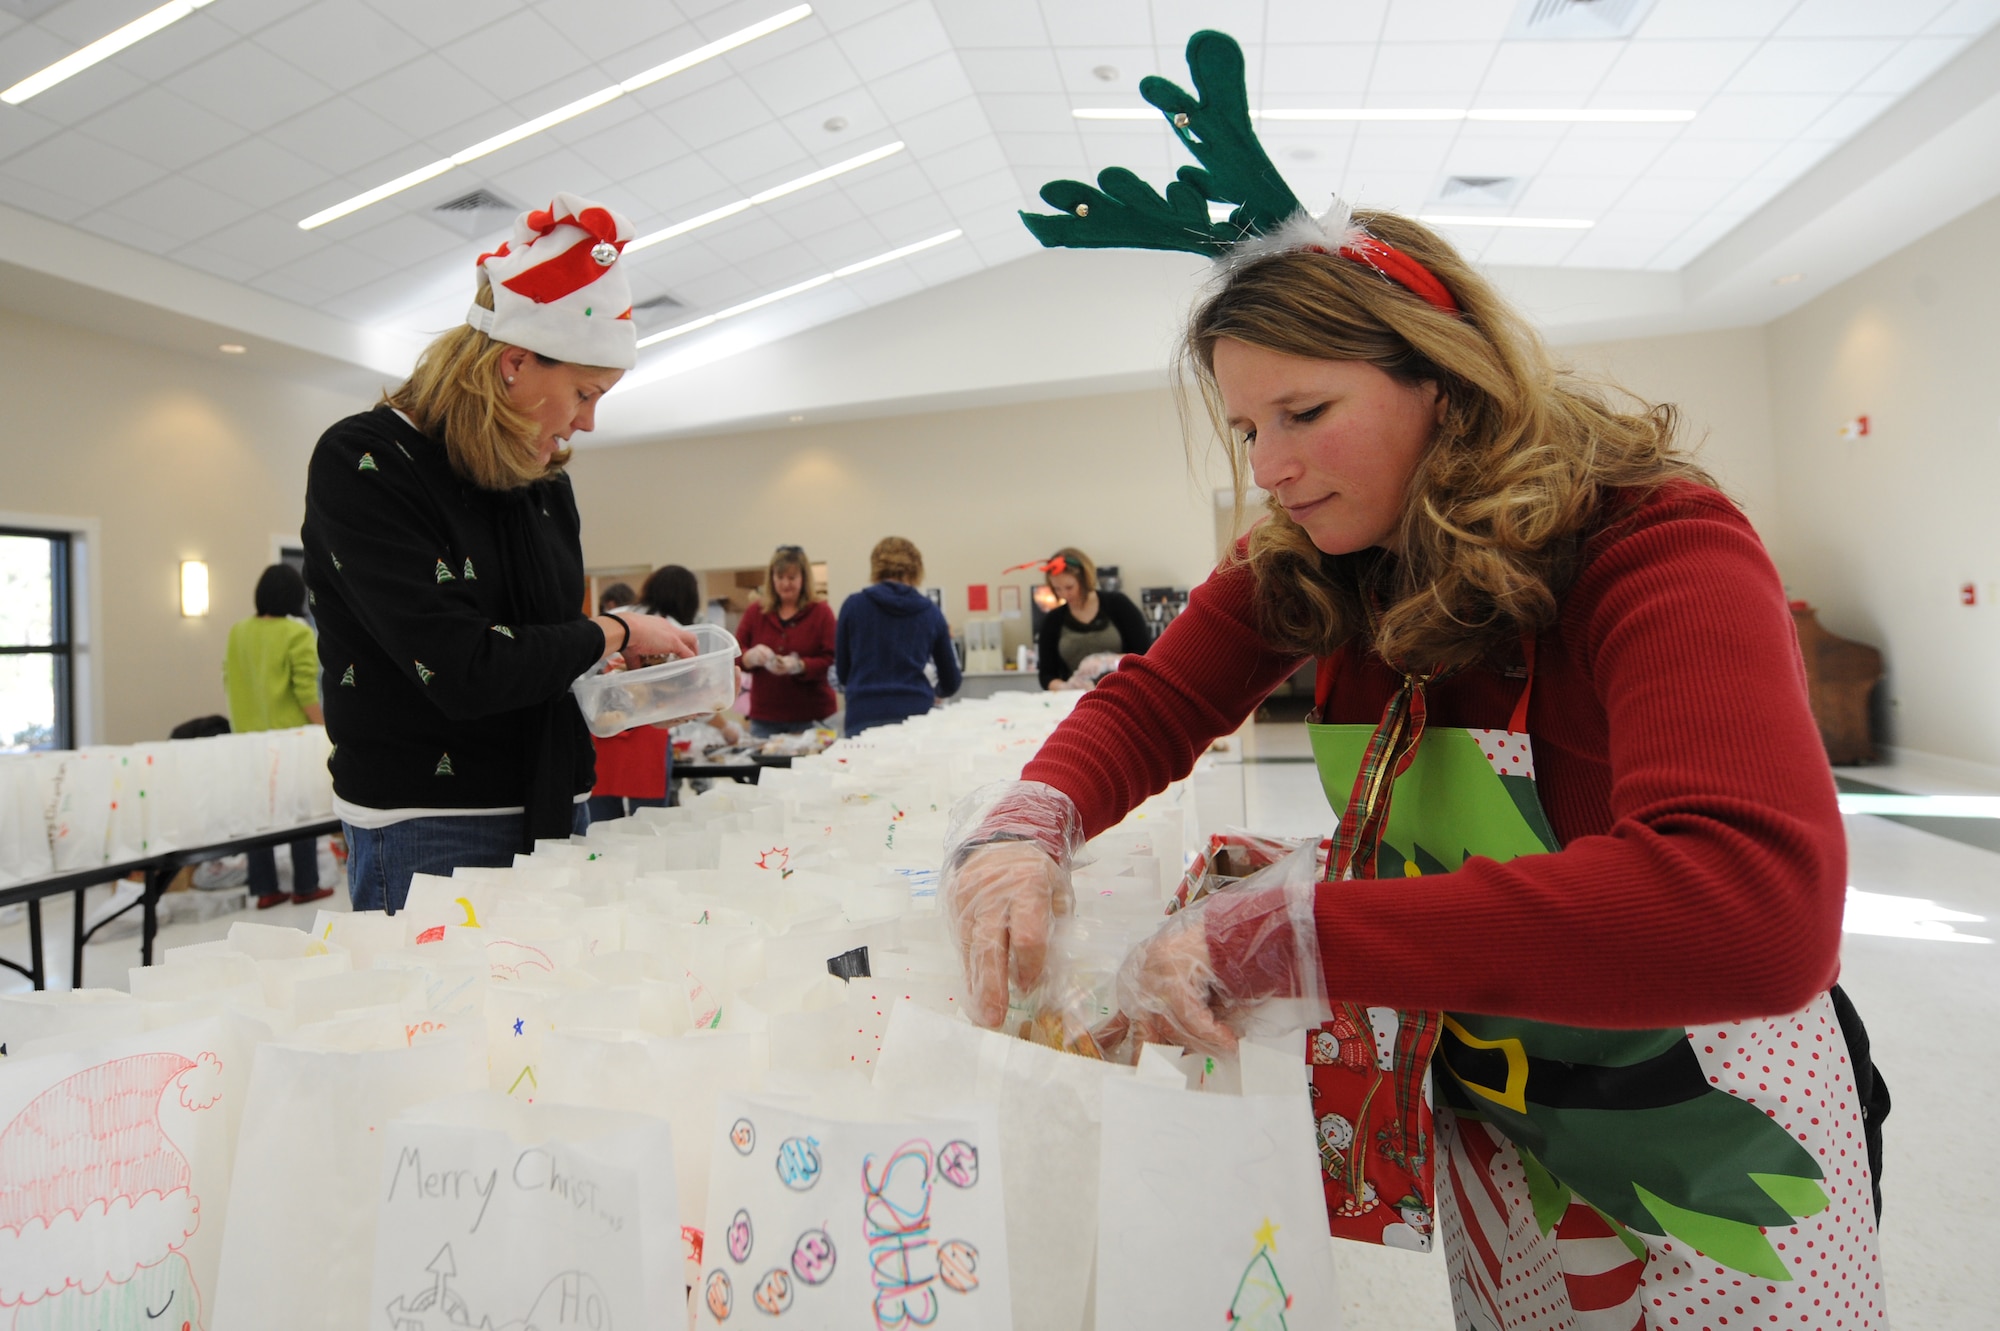 Joan Tufts, right, and Jane Holba place cookies in bags during the annual Team Charleston Spouses' Club Cookie Drop at Joint Base Charleston-Air Base, S.C., Dec. 8, 2010. This year, the TCSC put together more than 500 bags and boxes of holiday cookies for service members living in the base dormitories, eating at the dining facility and who are deployed. Mrs Tufts is wife of Maj. Adam Tufts with the 14th Airlift Squadron, and Mrs. Holba is the wife of Col. Robert Holba who is the 437th Operations Group commander. (U.S. Air Force photo/James M. Bowman)